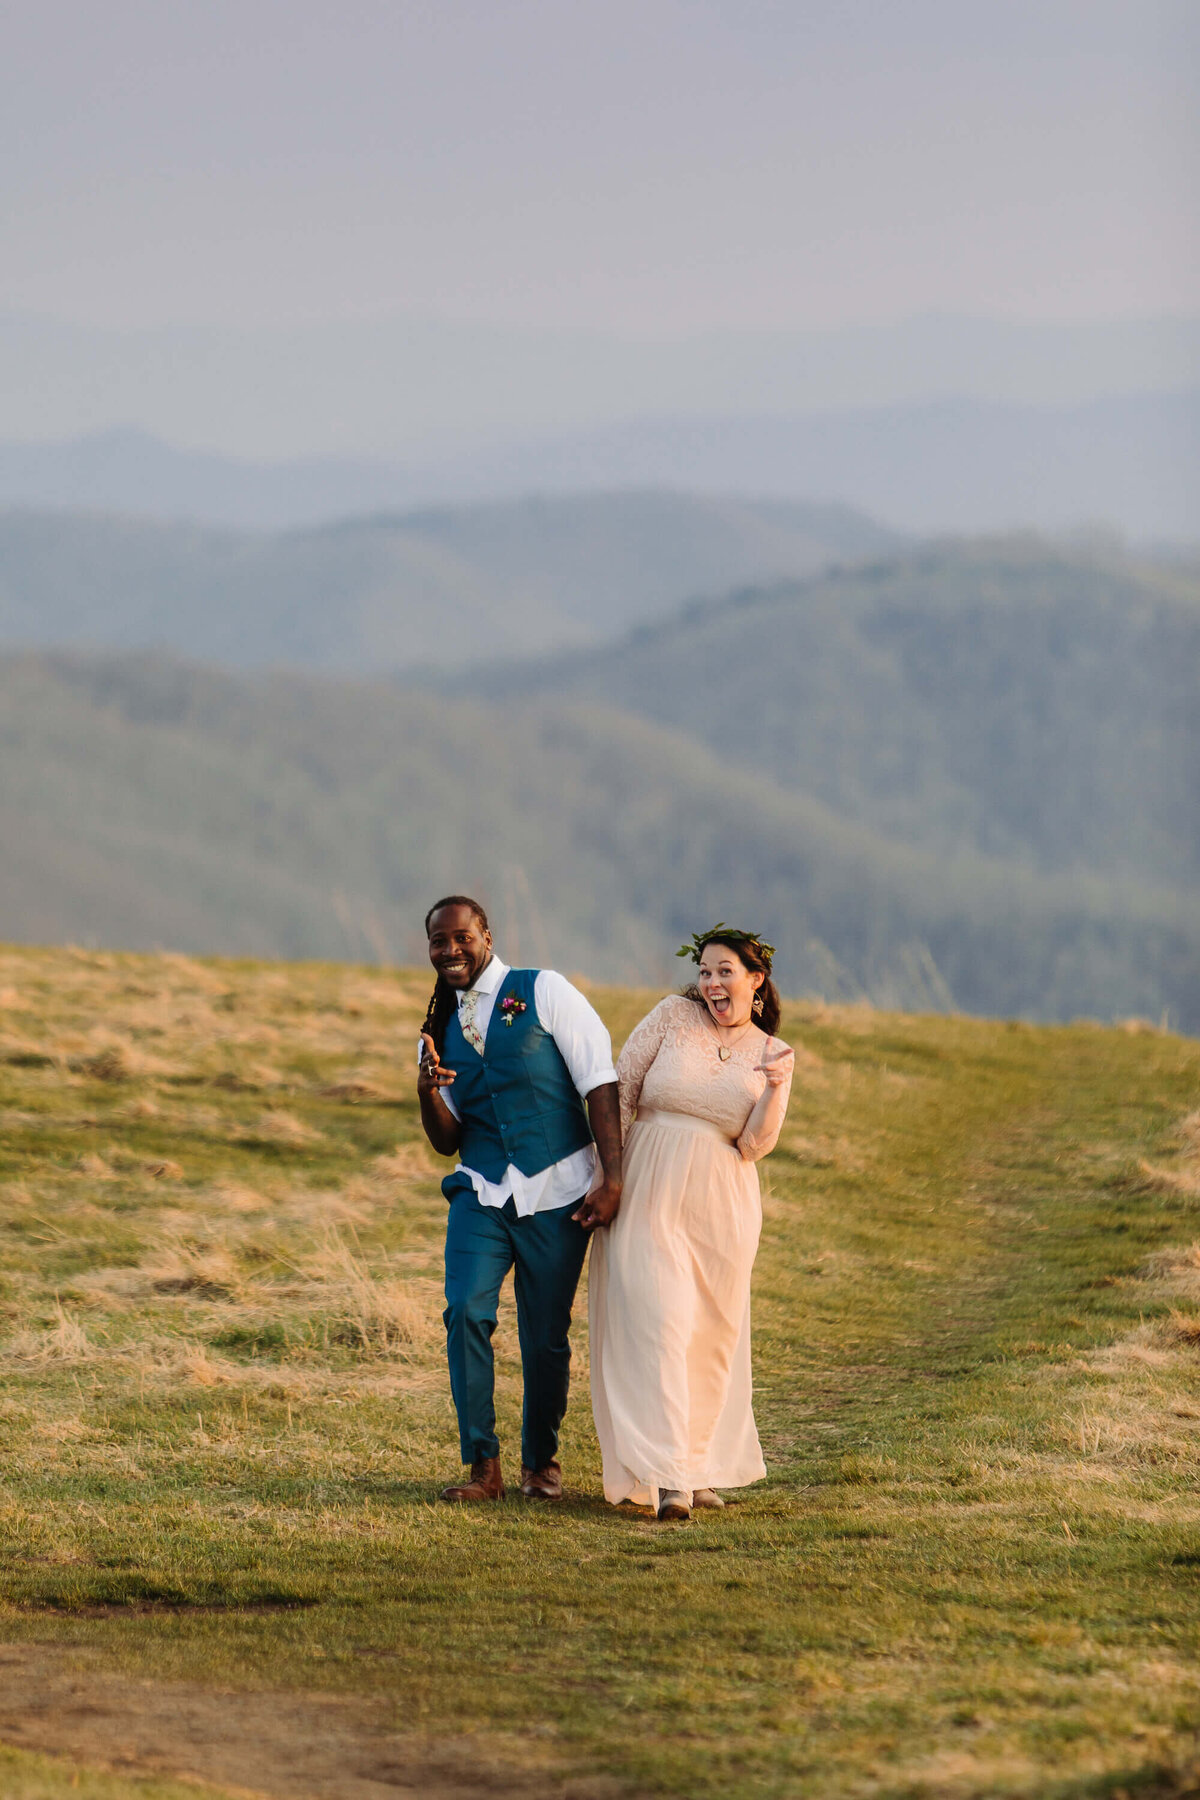 Max-Patch-Sunset-Mountain-Elopement-75